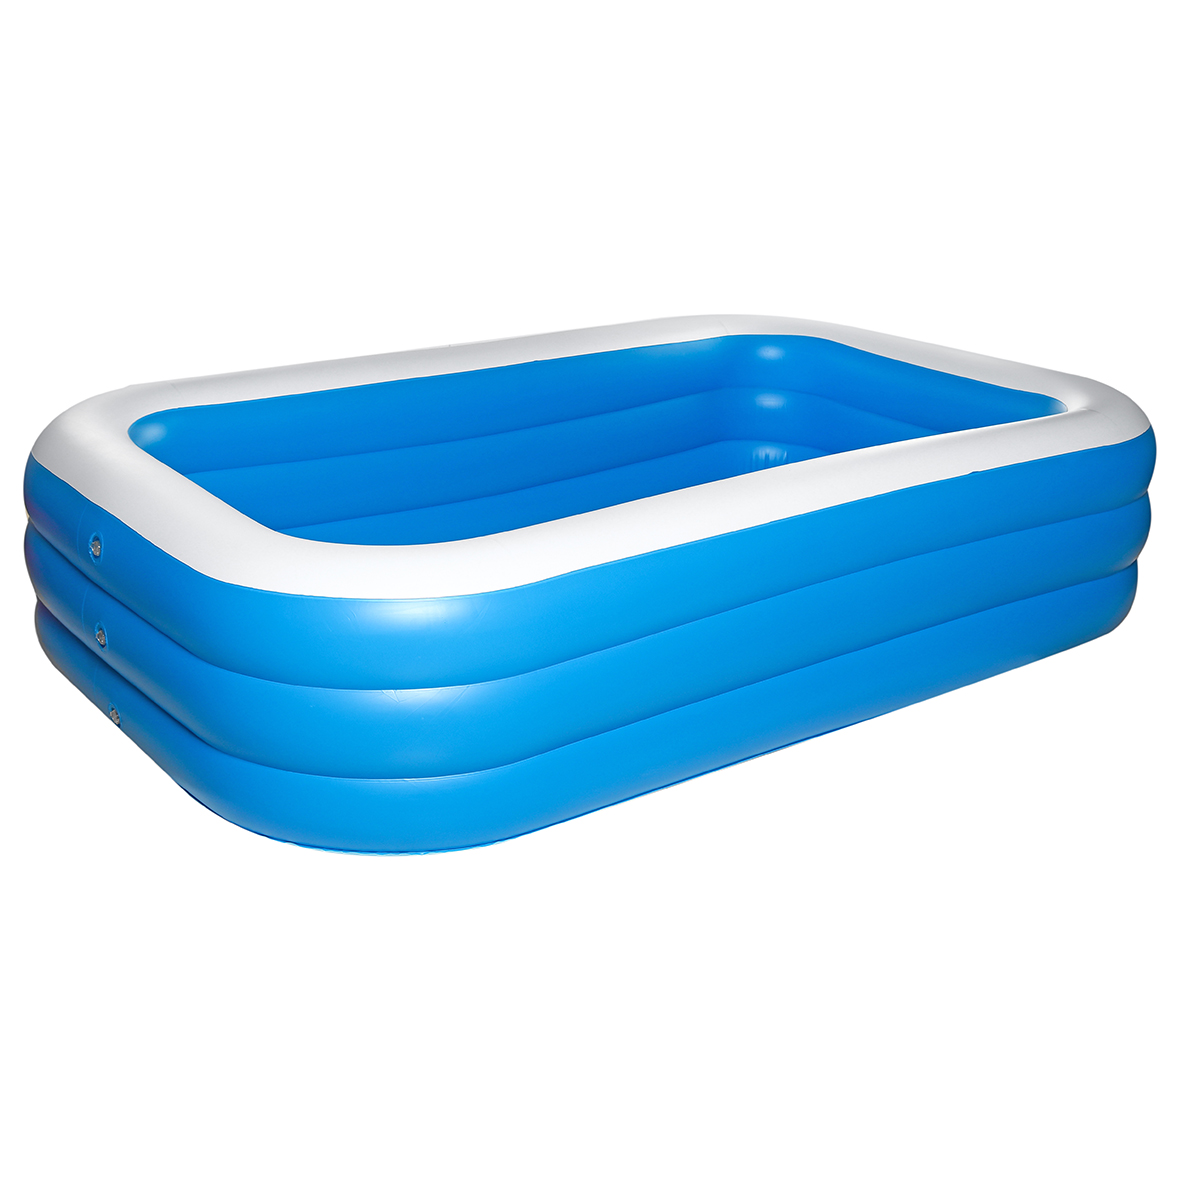 15--18--21--26m-Childrens-Inflatable-Swimming-Pool-Baby-Paddling-Pool-Summer-Swimming-Pool-1706347-9